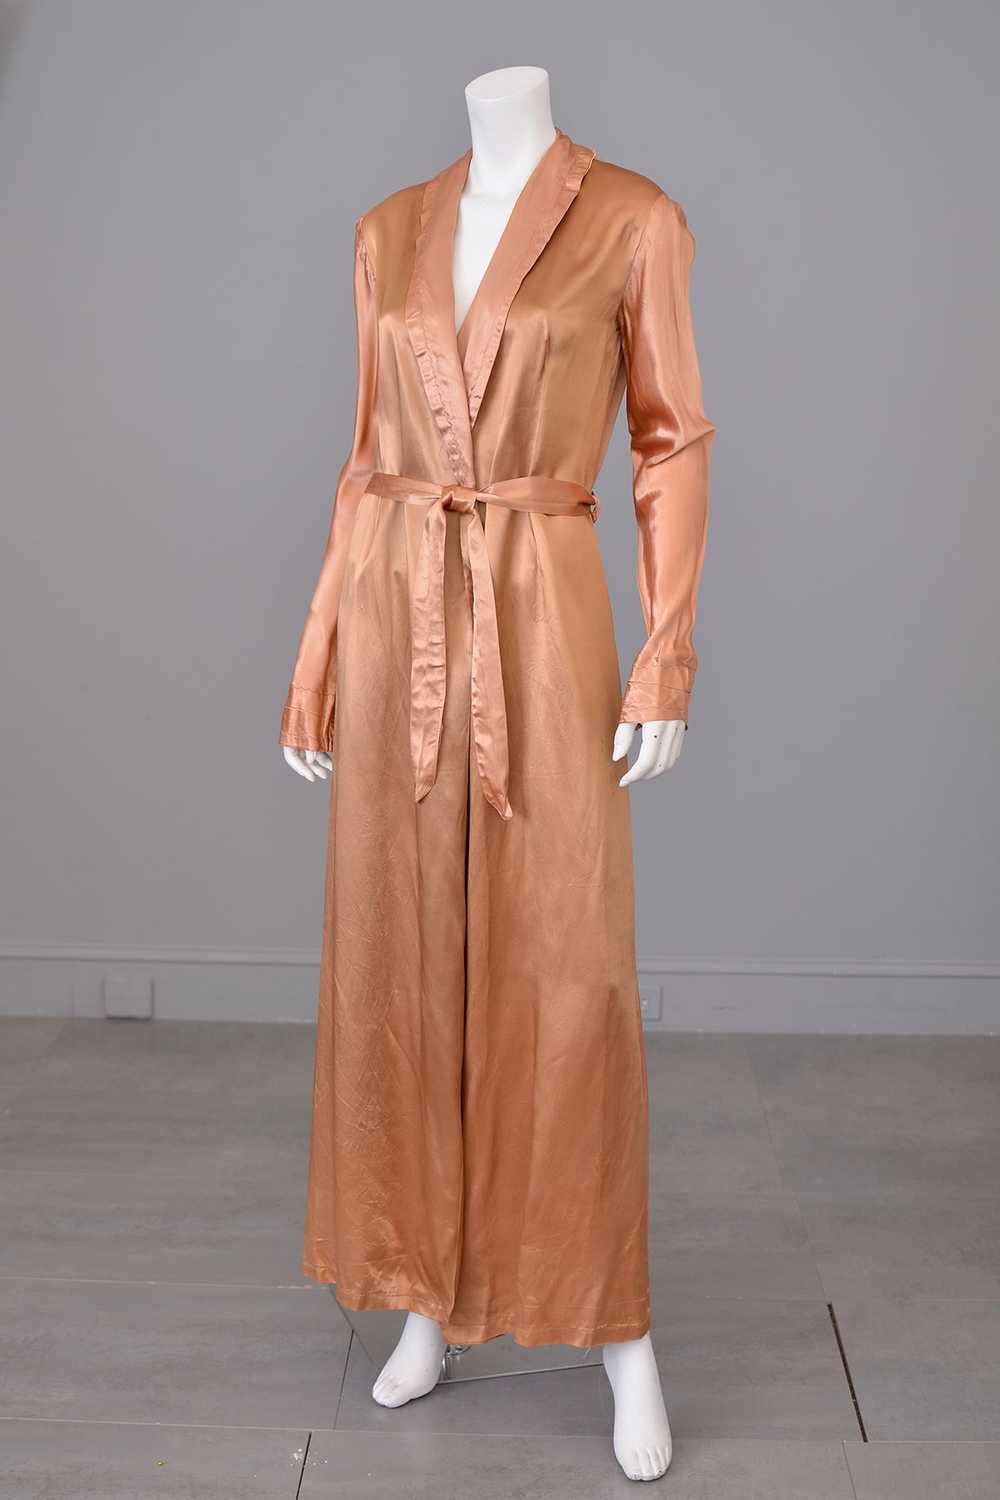 1940s Copper Satin Lounging Robe - image 2